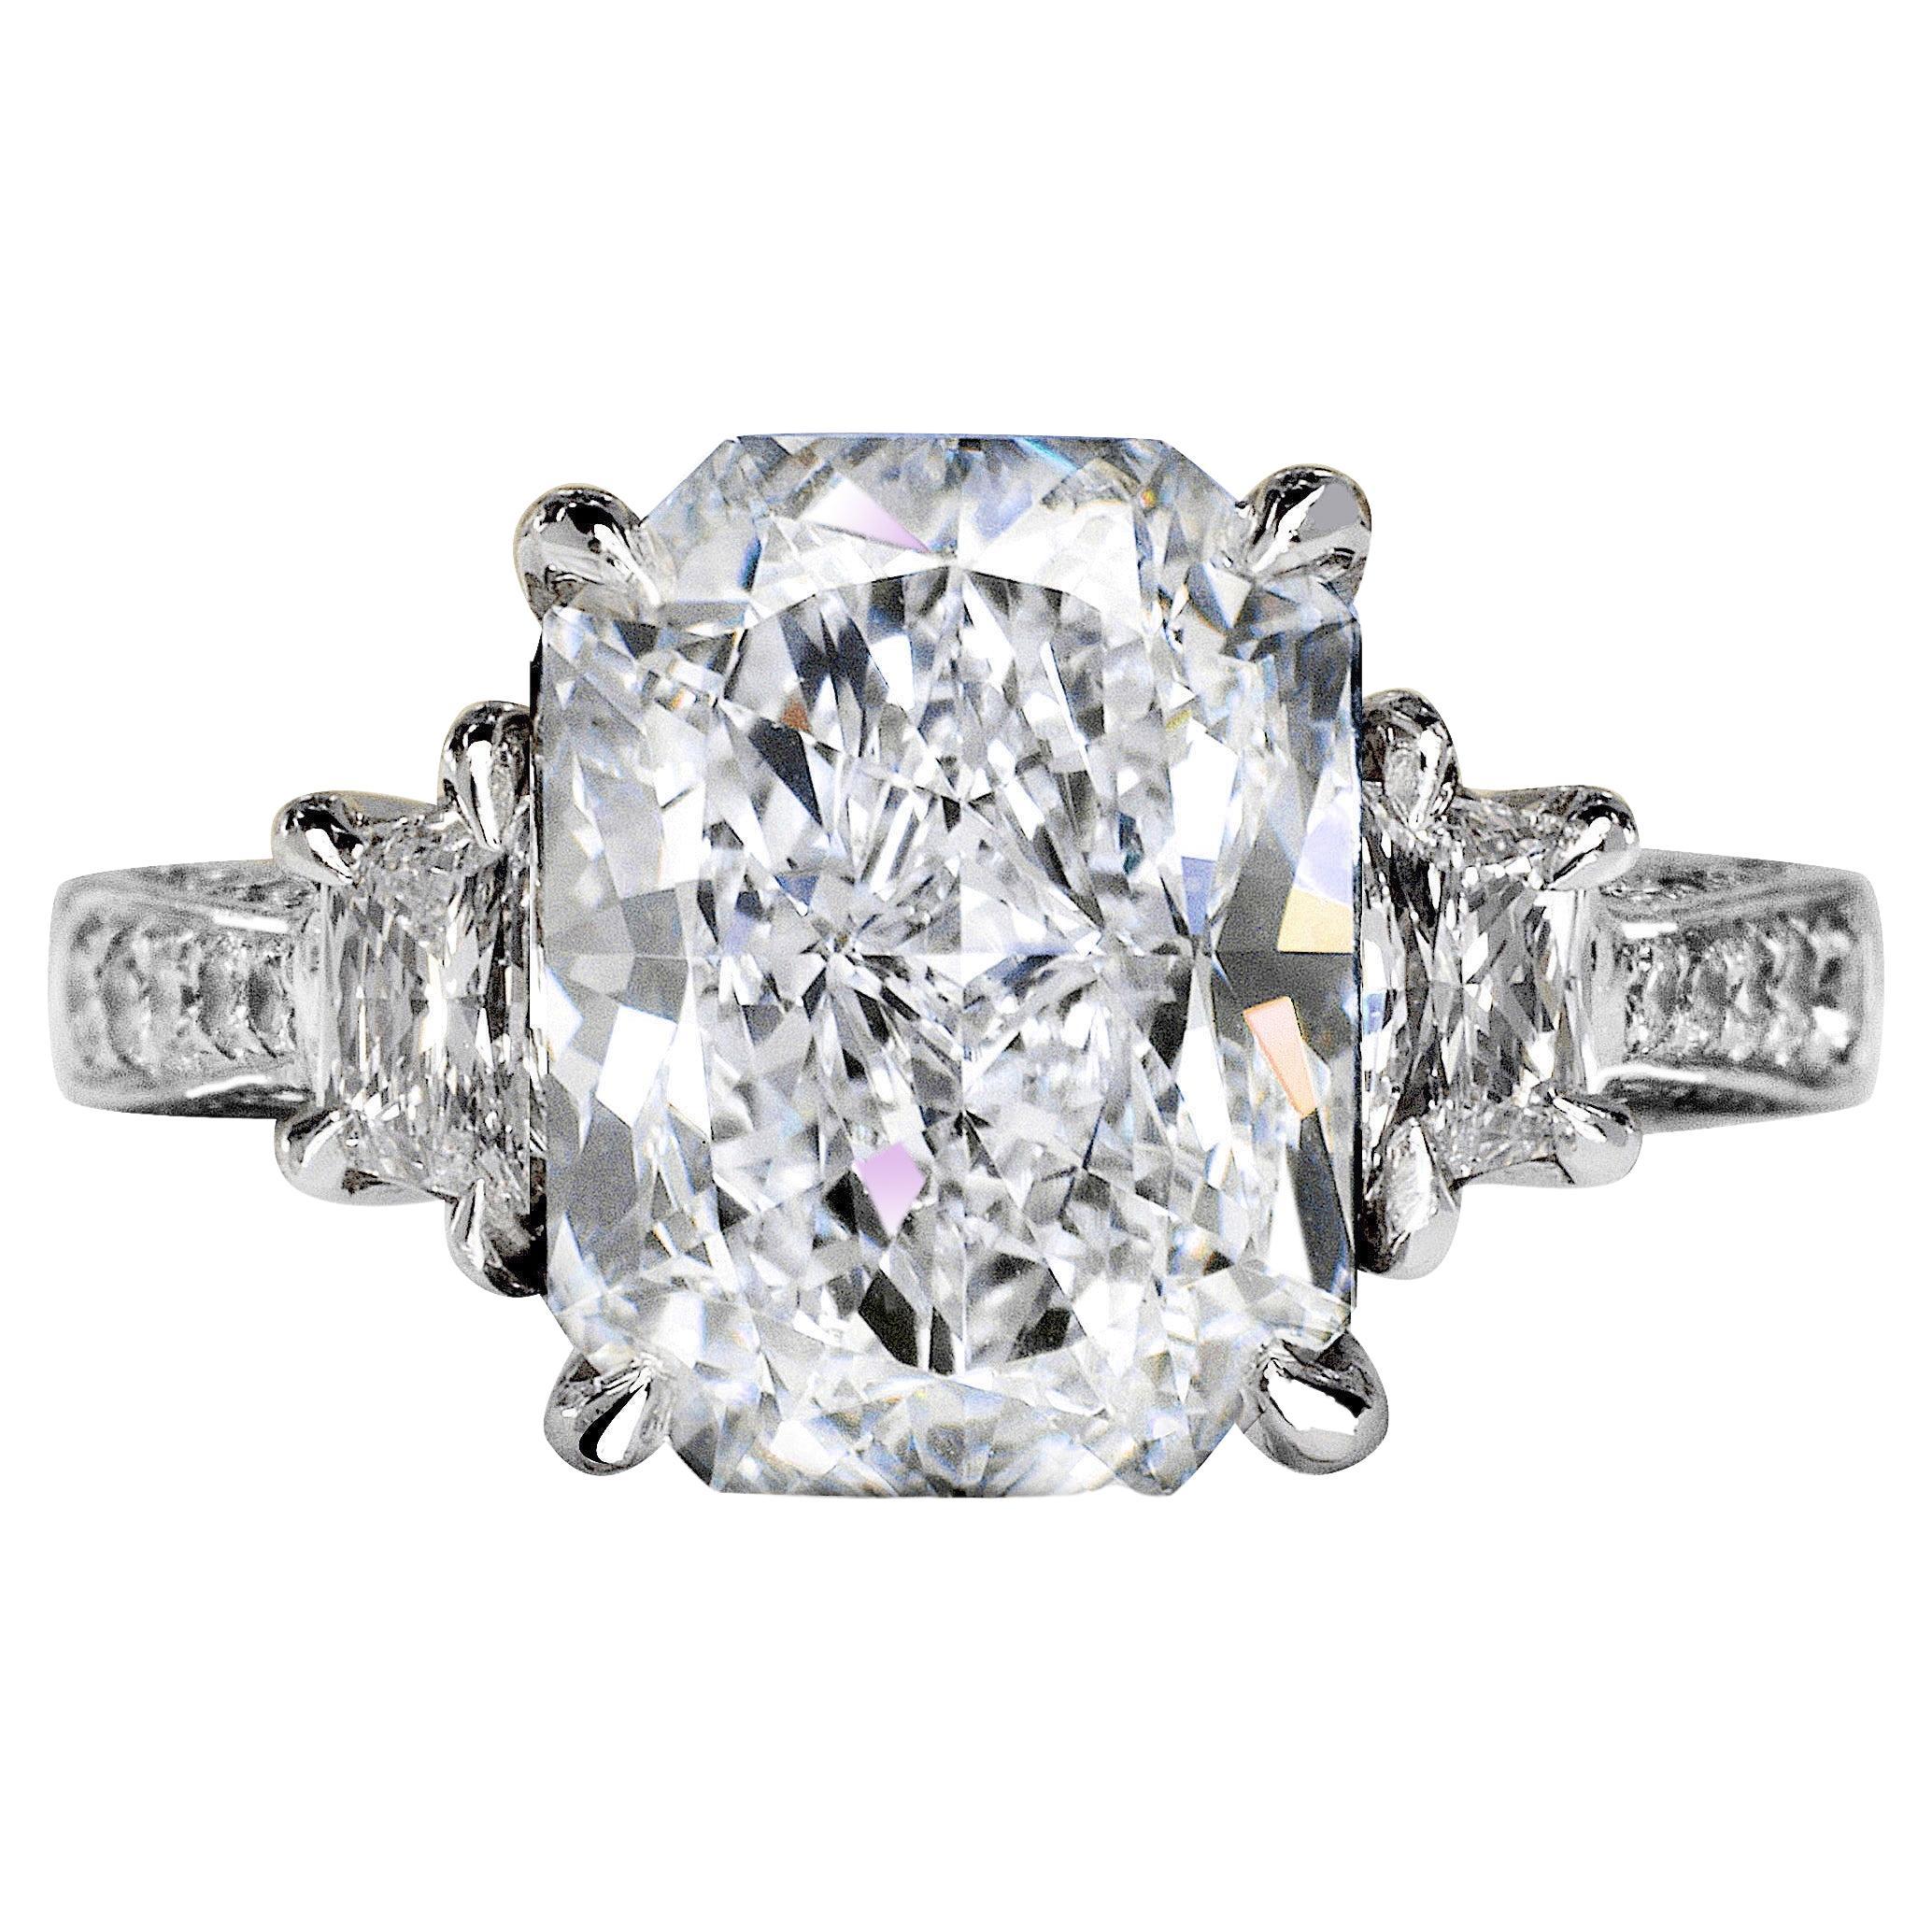 7 Carat Radiant Cut Diamond Engagement Ring GIA Certified F VVS1 For Sale